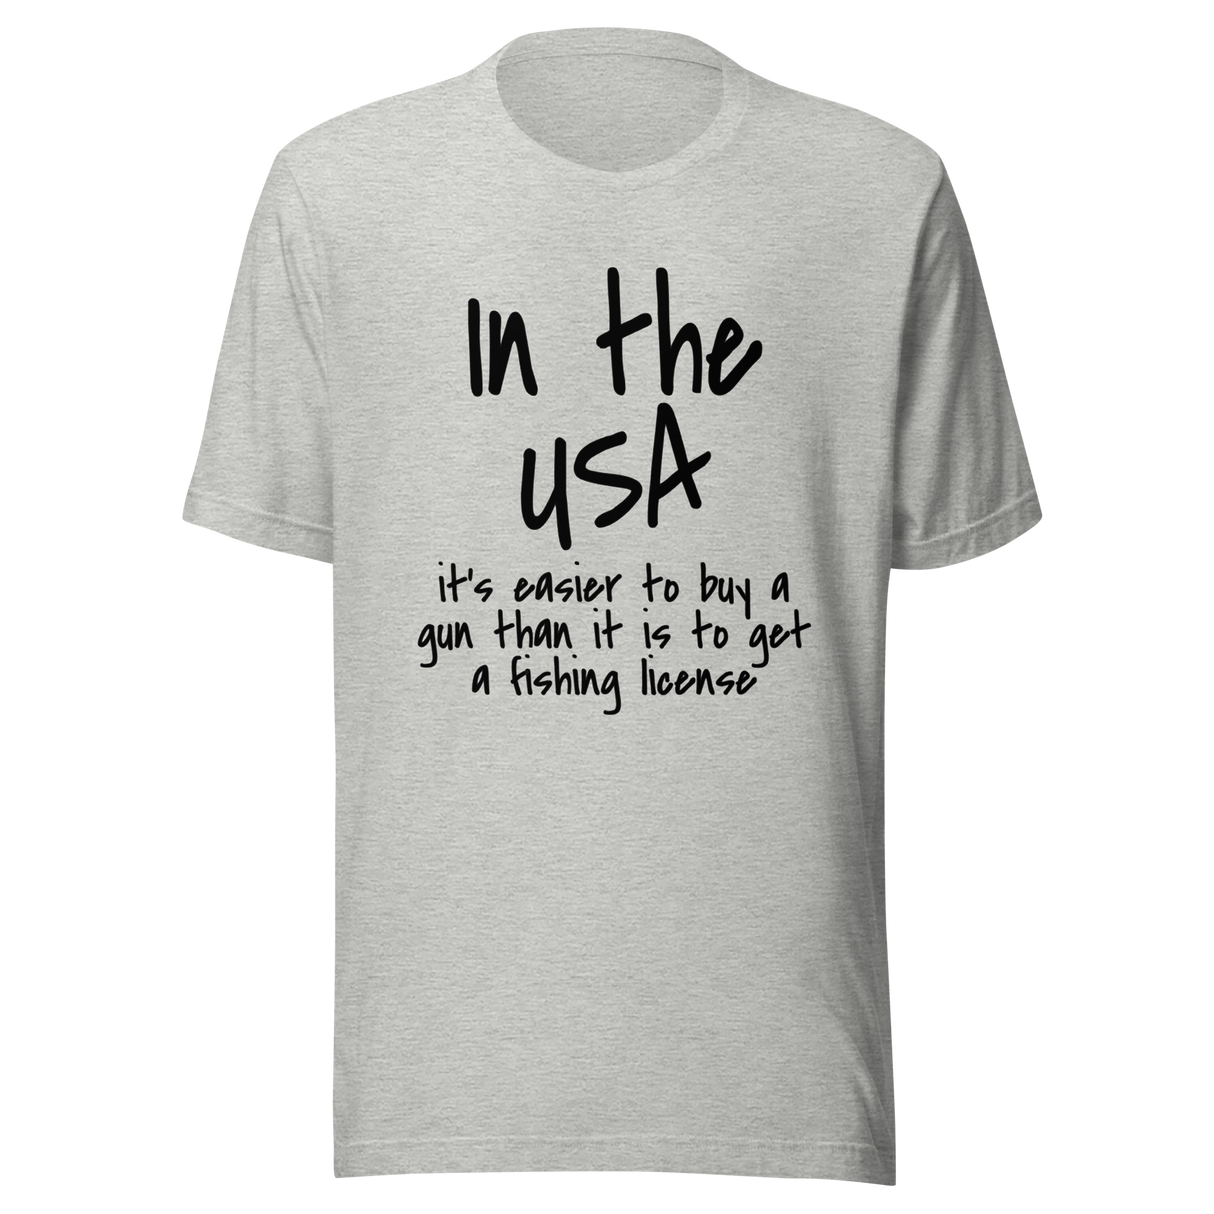 in-the-usa-its-easier-to-buy-a-gun-than-it-is-to-get-a-fishing-license-usa-tee-government-t-shirt-buy-tee-t-shirt-tee#color_athletic-heather